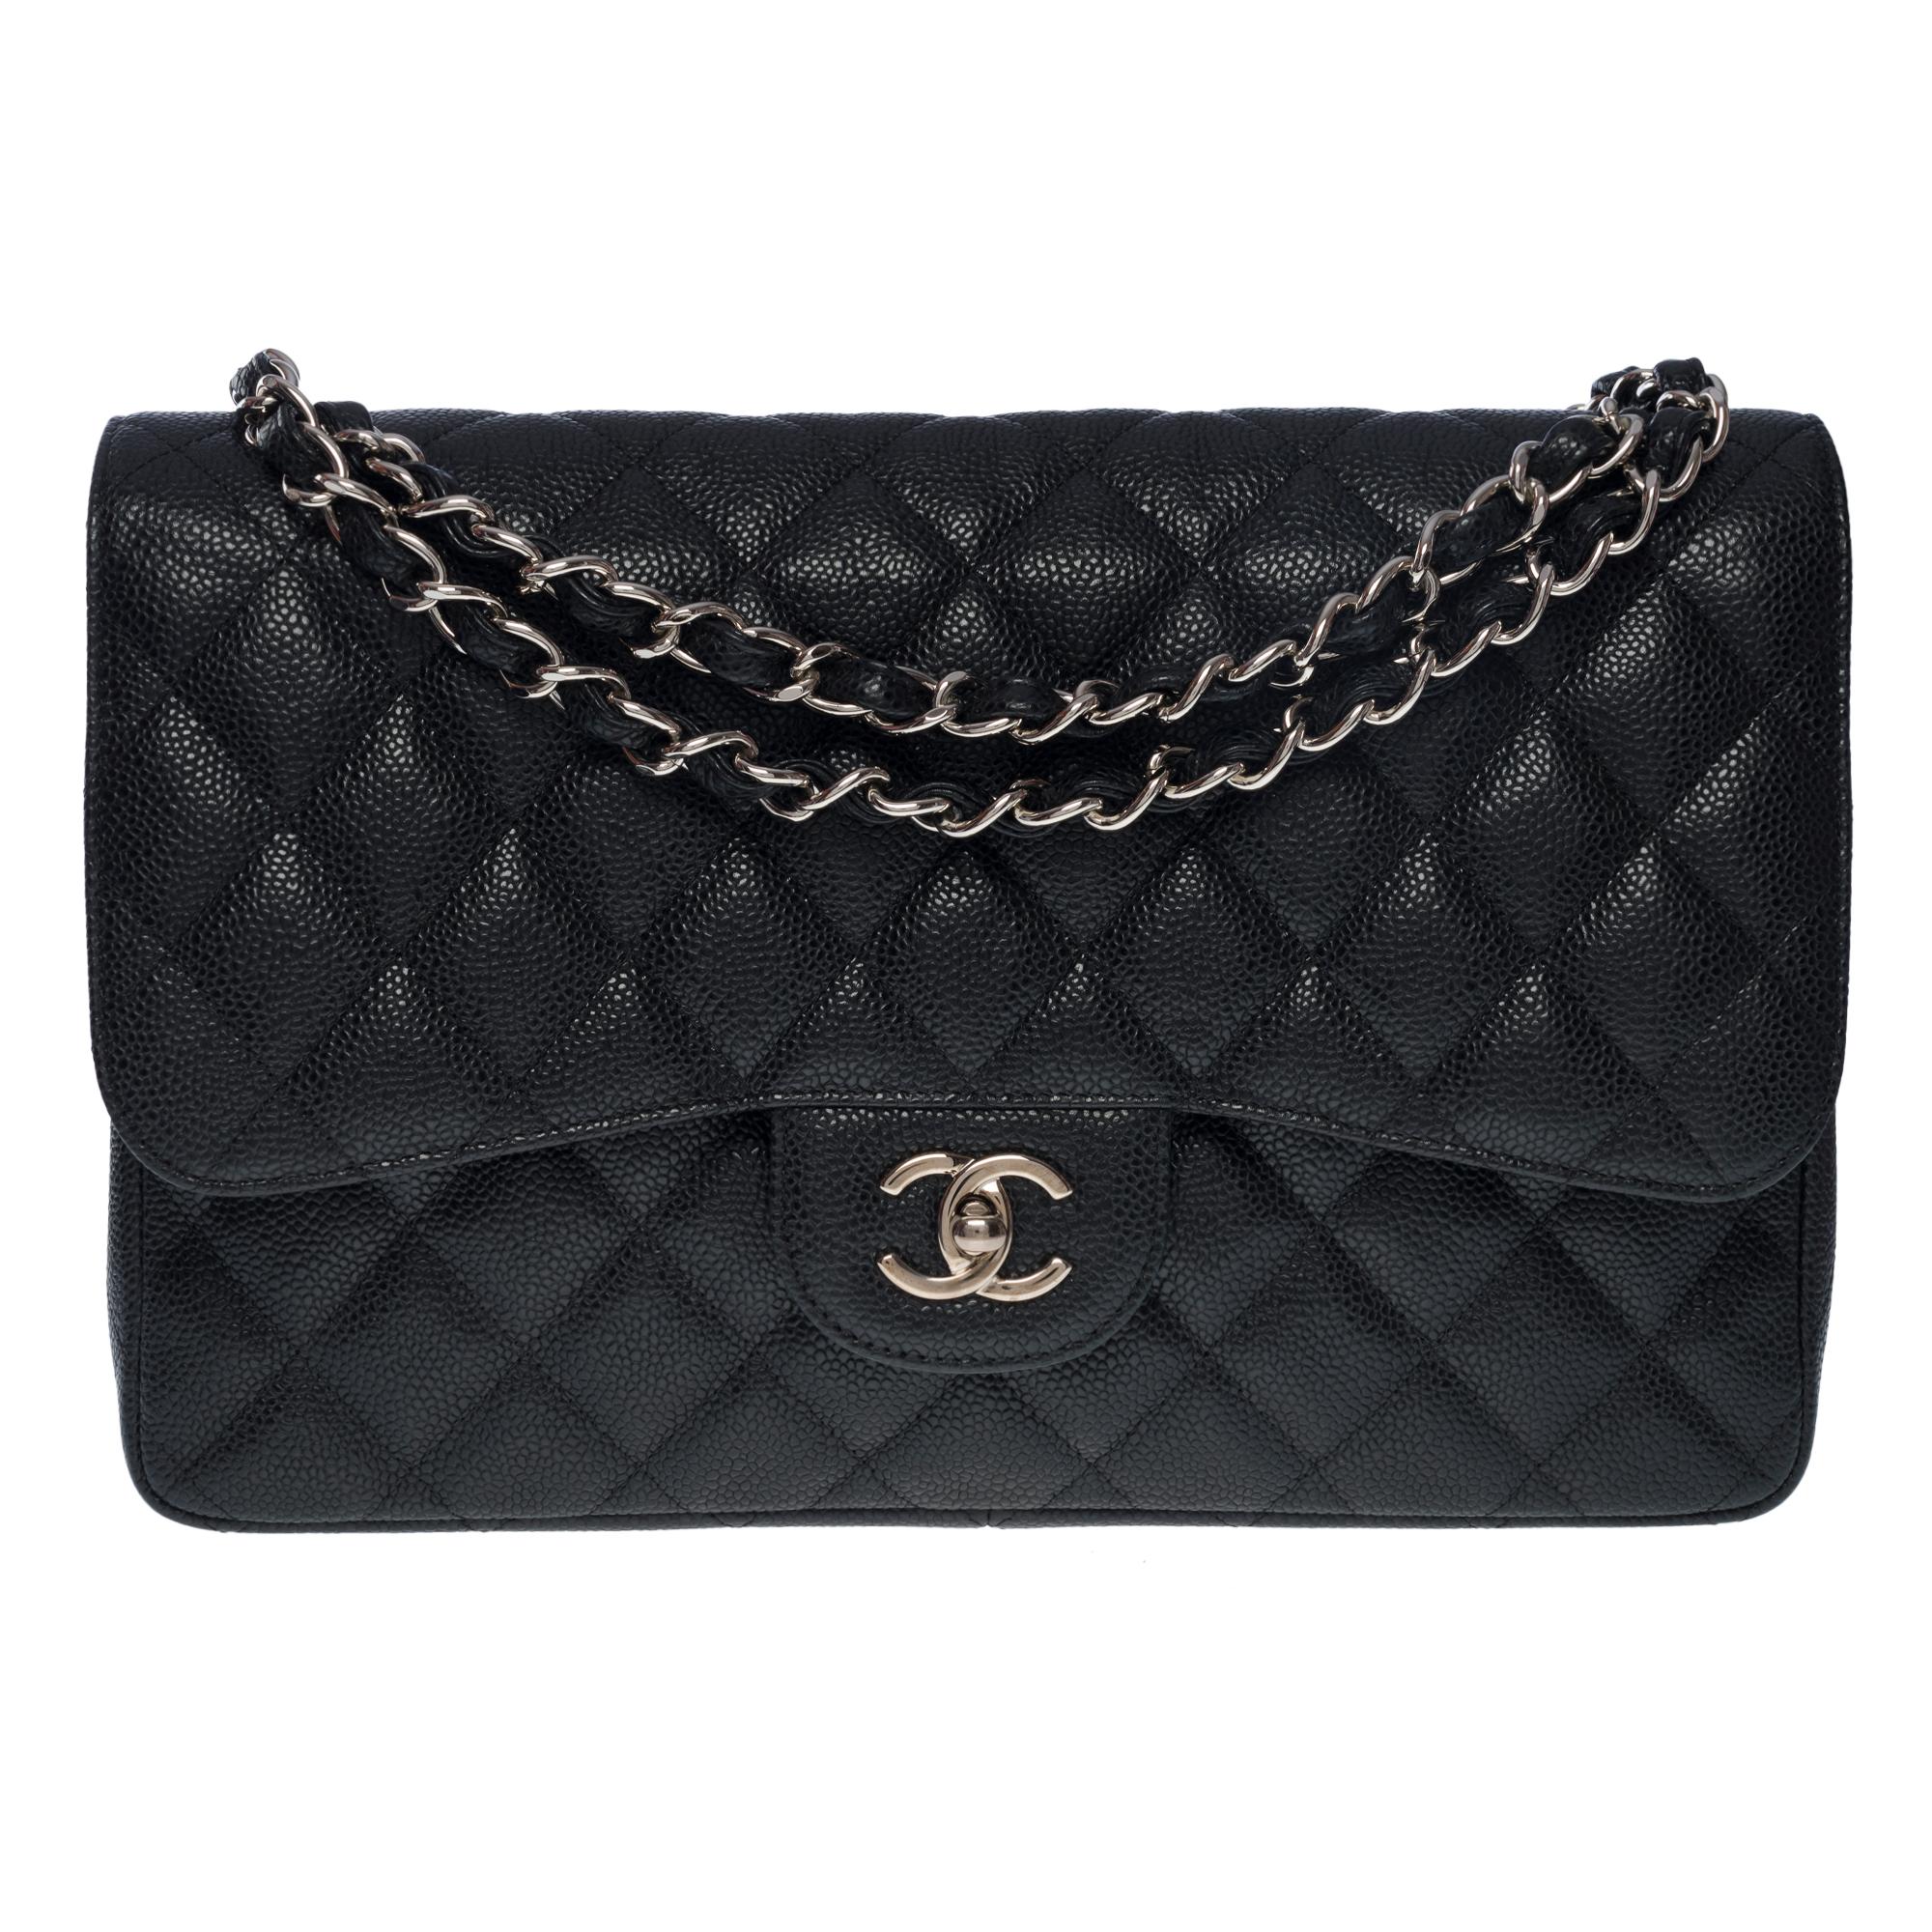 Exceptional Chanel Timeless Jumbo double flap shoulder bag in black caviar quilted leather, silver metal hardware, a chain-handle in silver interlaced with black caviar leather for a hand and shoulder

A patch pocket on the back of the bag
Flap